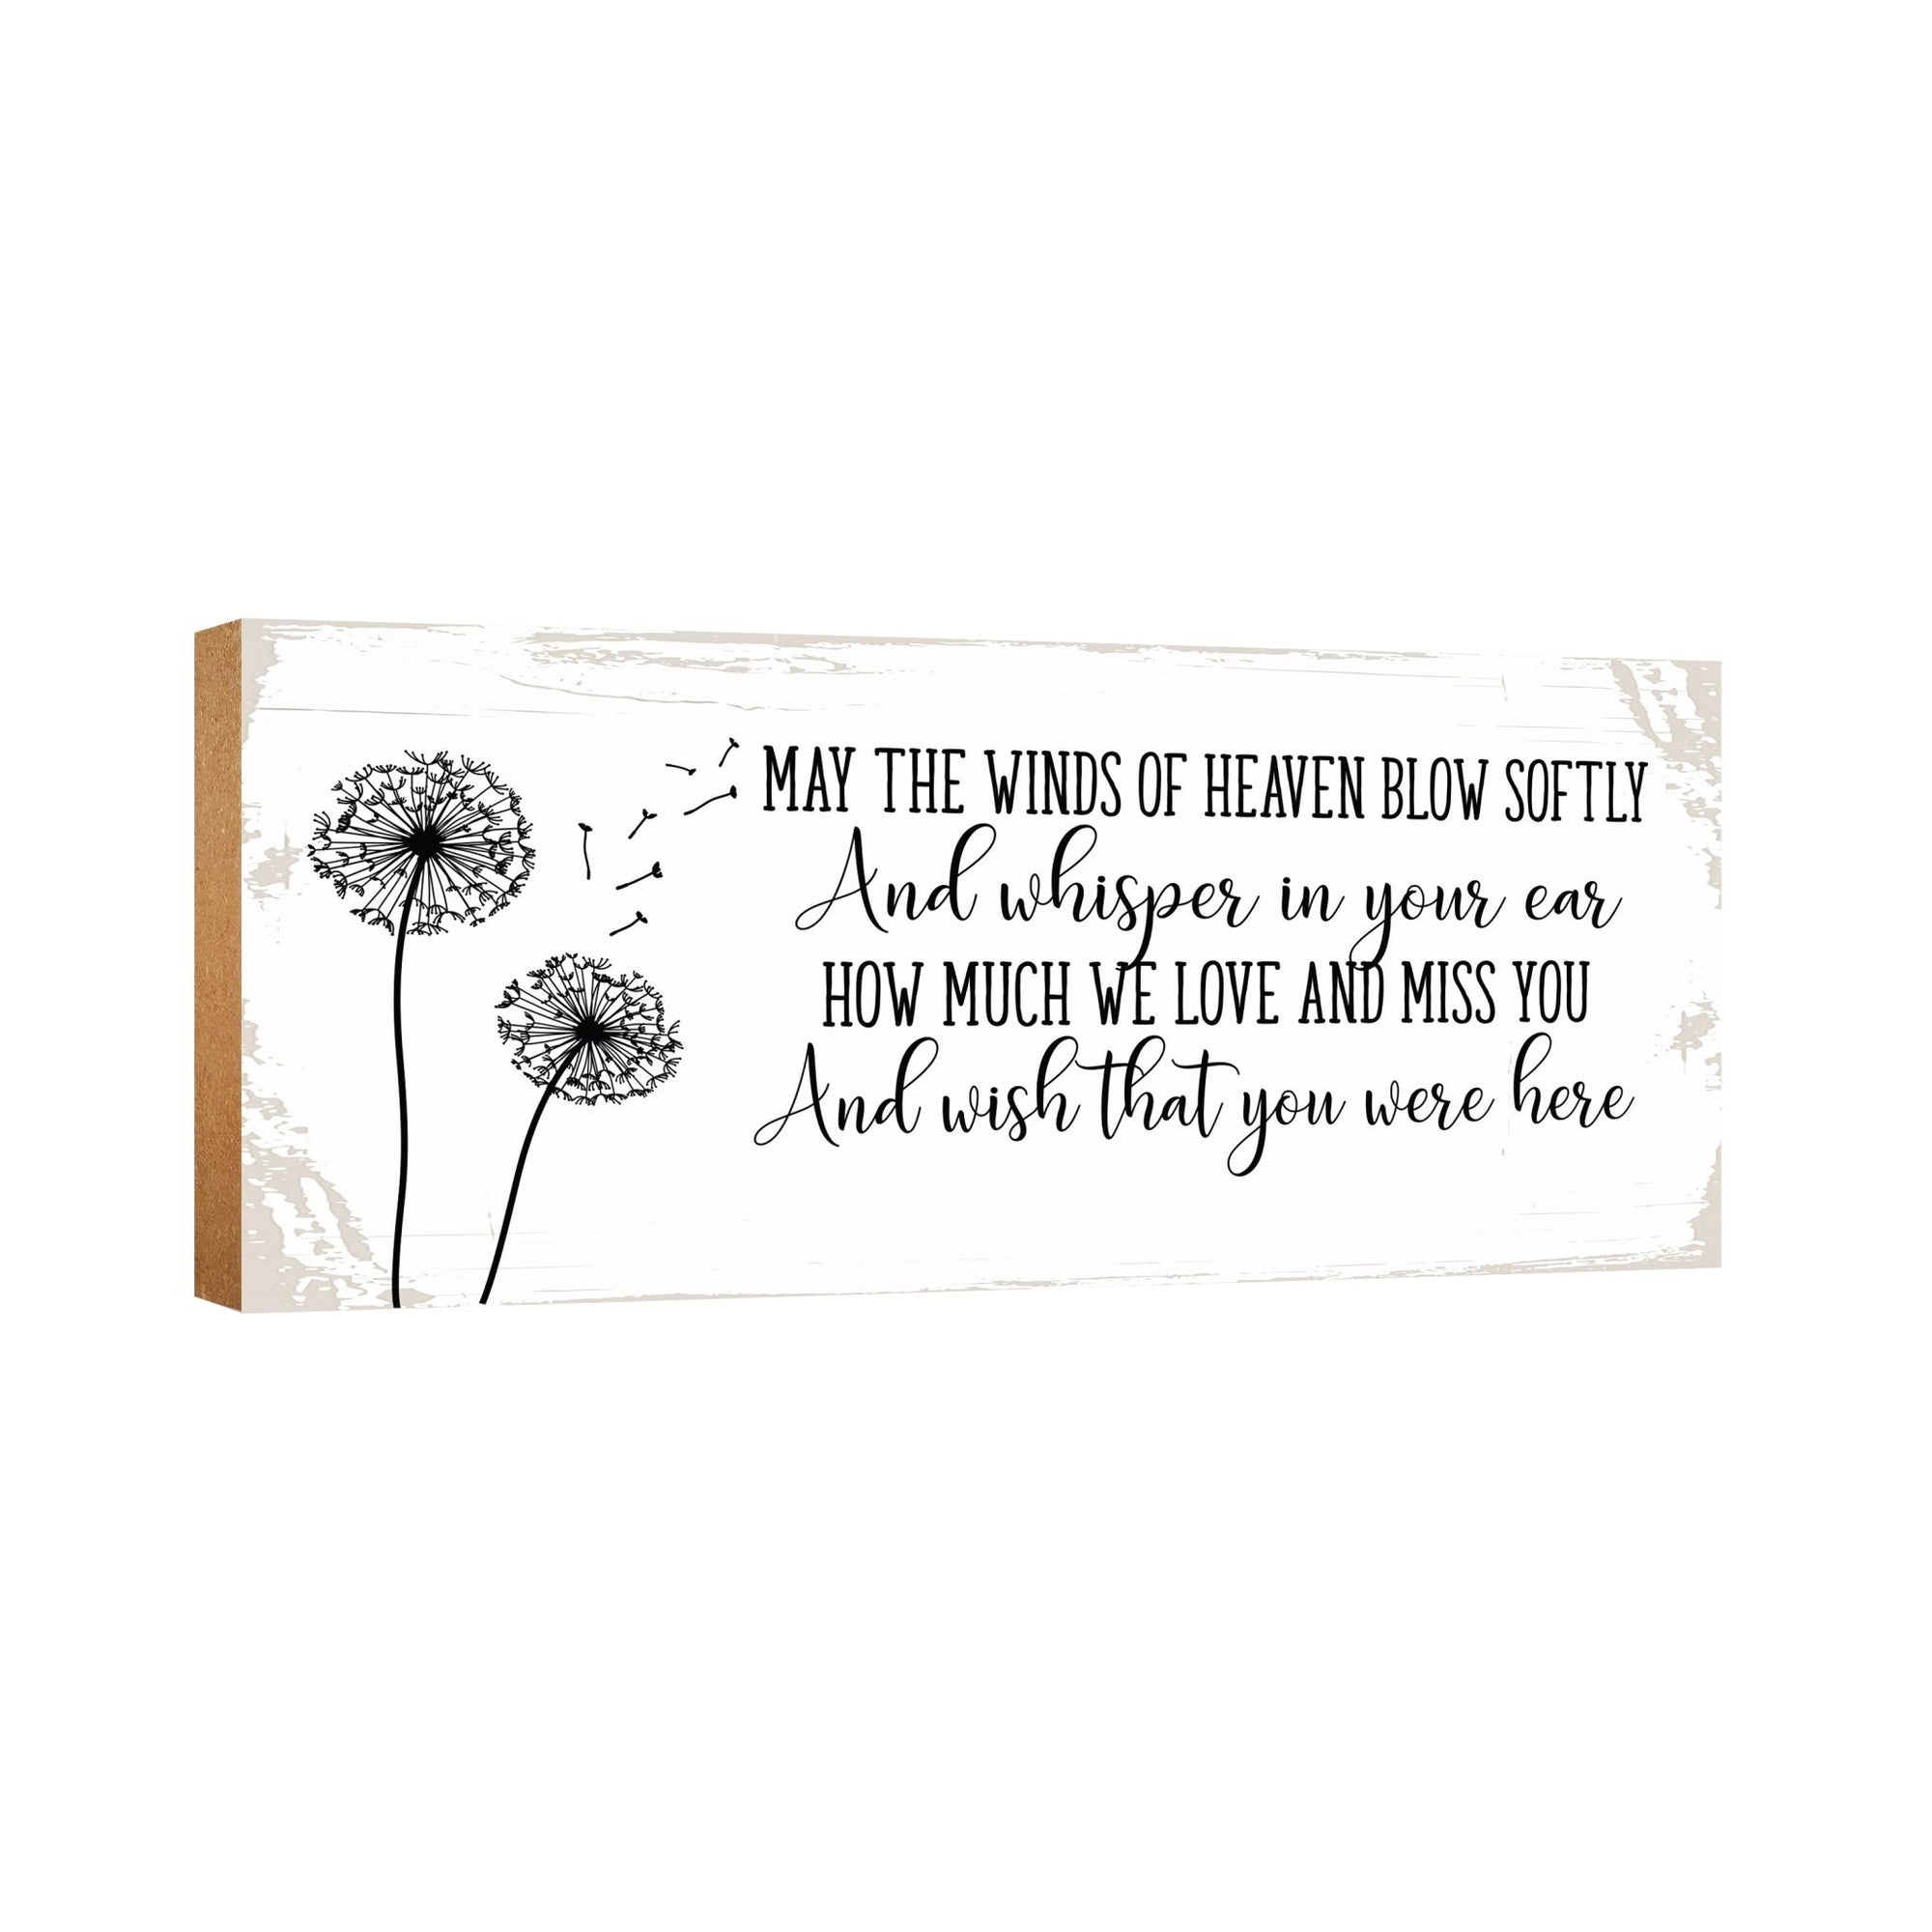 Modern Inspirational Pet Memorial 4x10 inches Wooden Sign (May The Winds) Tabletop Plaque Home Decoration Loss of Pet Bereavement Sympathy Keepsake - LifeSong Milestones